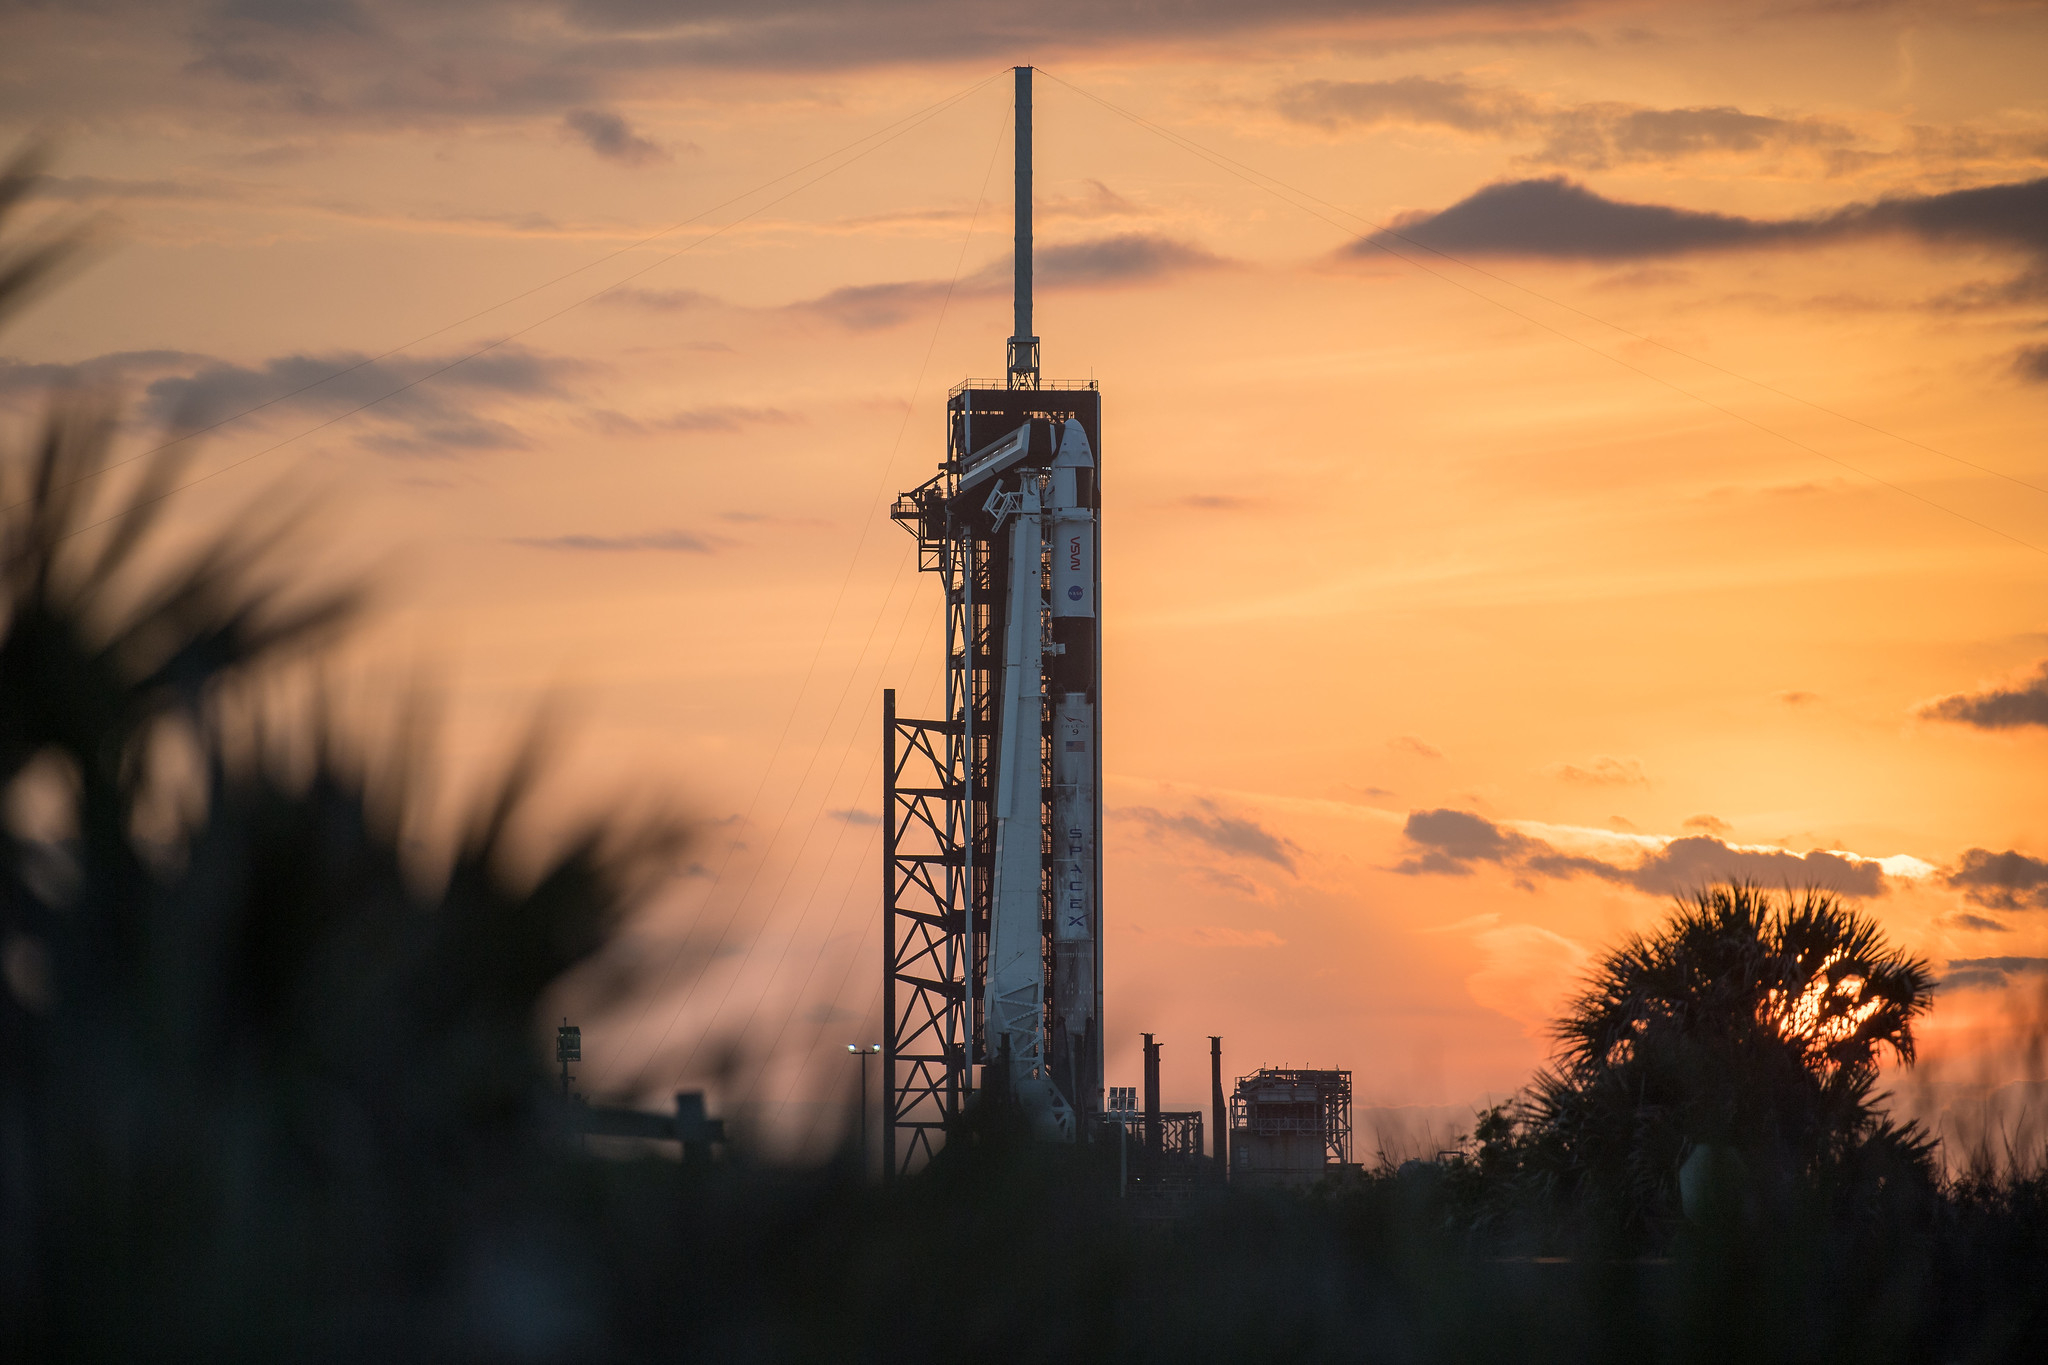 A SpaceX Falcon 9 rocket with the company's Crew Dragon spacecraft onboard is seen on the launch pad at Launch Complex 39A at NASA's Kennedy Space Center in Florida.